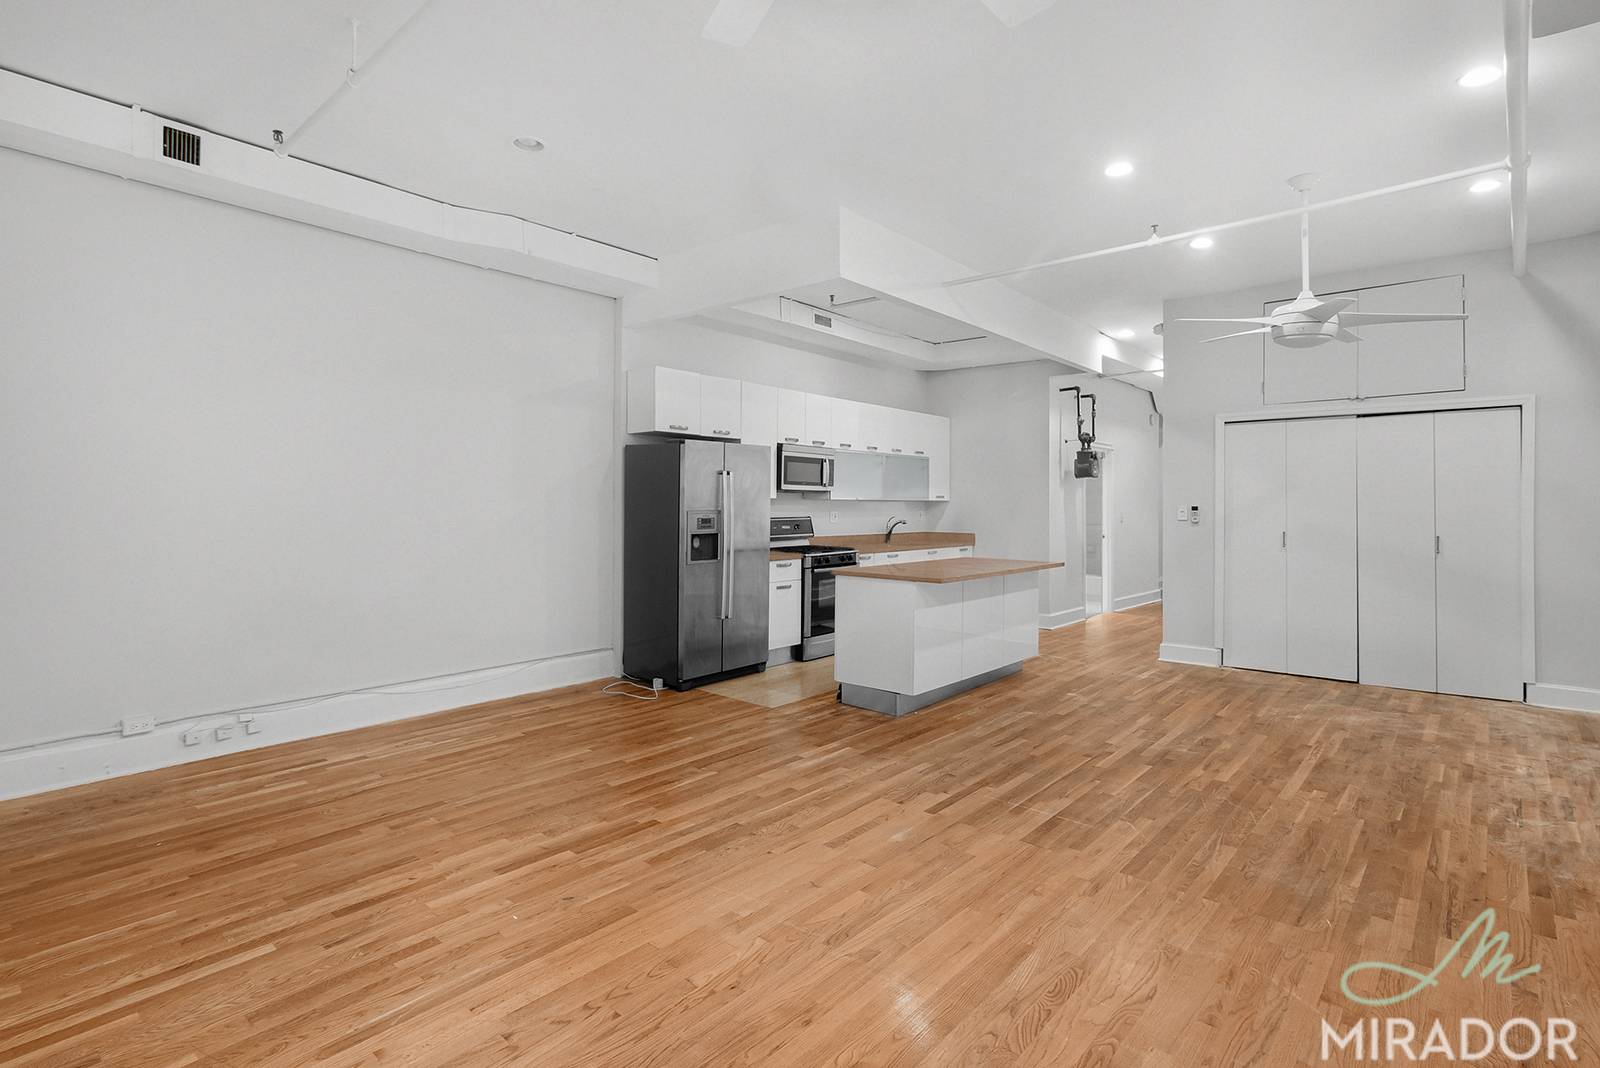 This loft like apartment features all the benefits of a condo with the privacy of a boutique rental building.